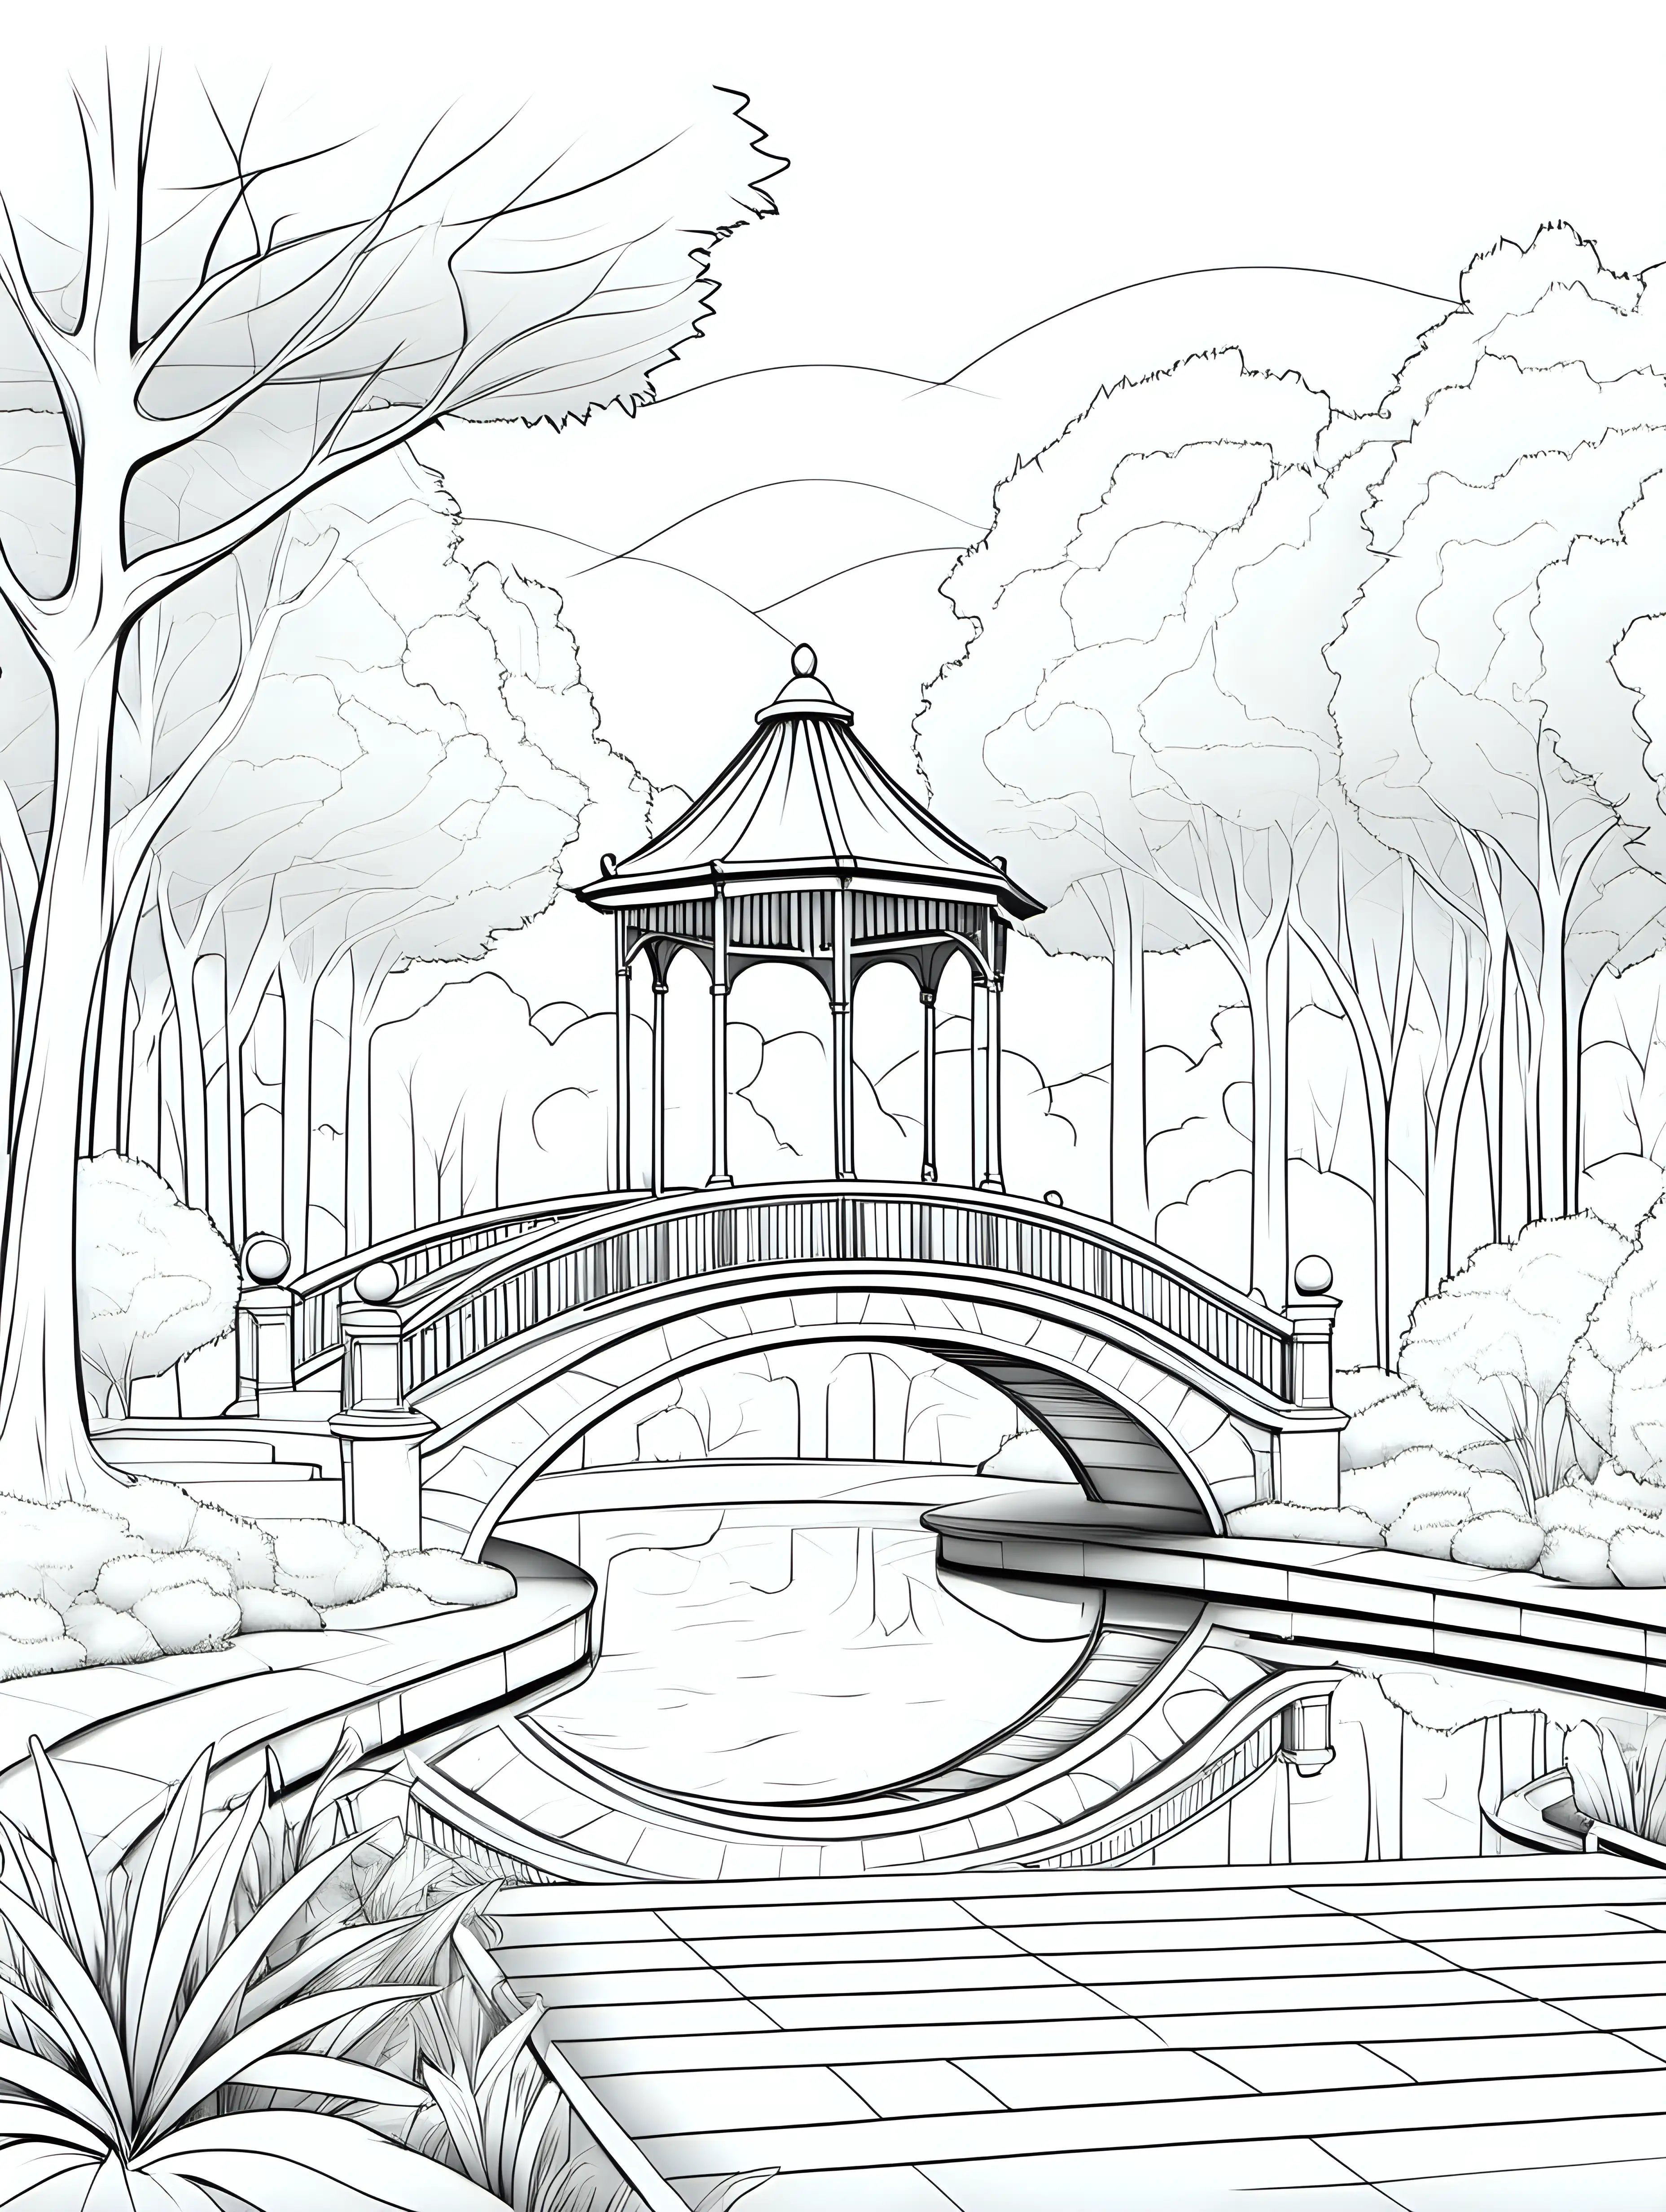 Minimalist Park Coloring Page with Bridge and Gazebo